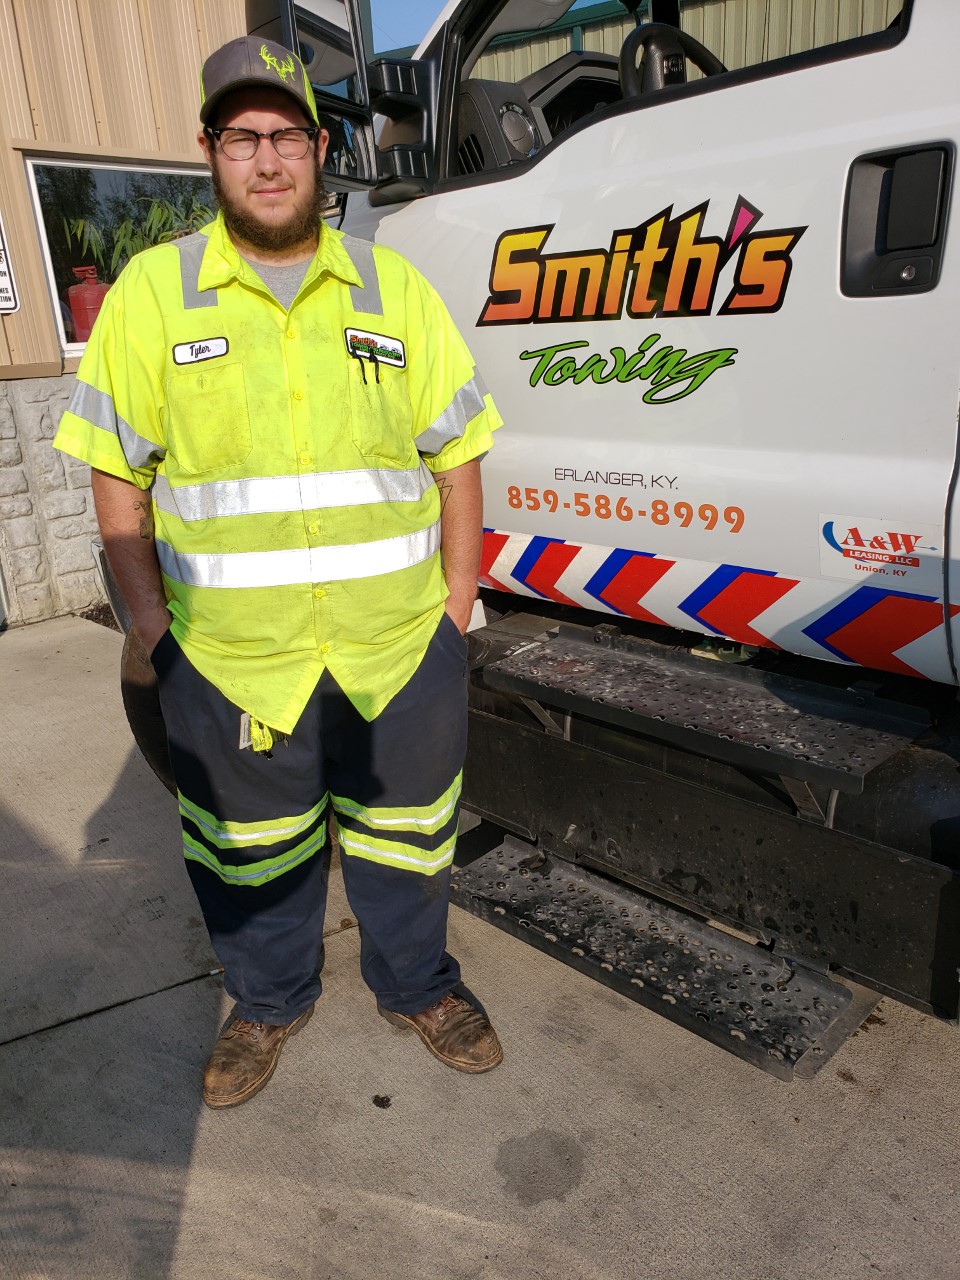 Smith's Towing